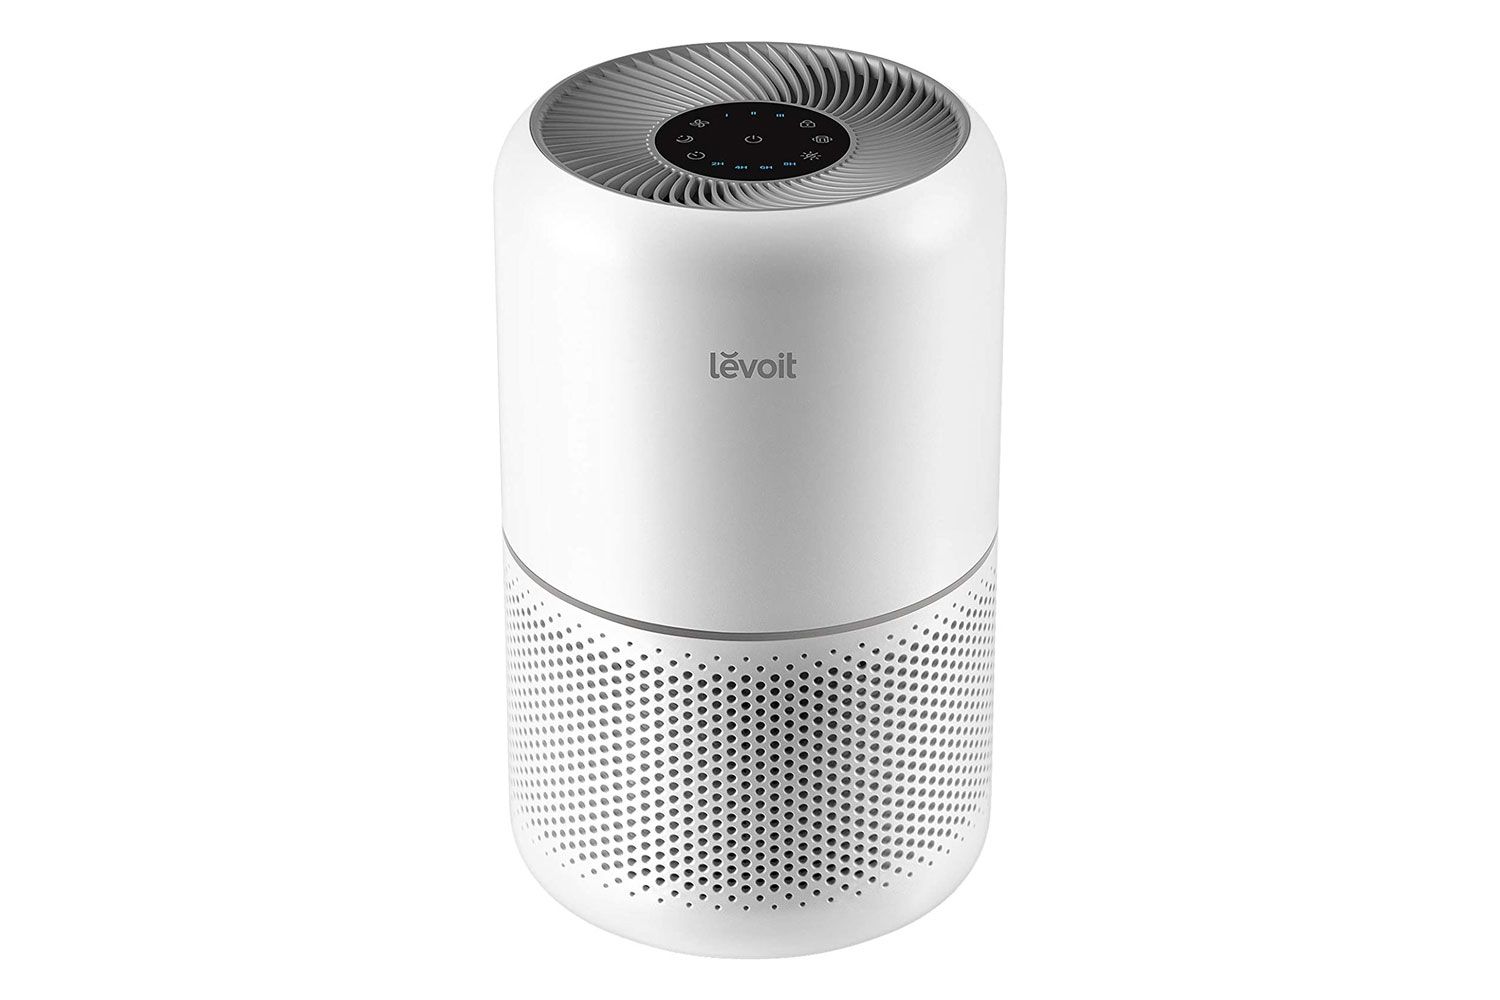 Amazon LEVOIT Air Purifier for Home Allergies Pets Hair in Bedroom, Covers Up to 1095 ft² by 45W High Torque Motor, 3-in-1 Filter with HEPA sleep mode, Remove Dust Smoke Pollutants Odor, Core300-P, White